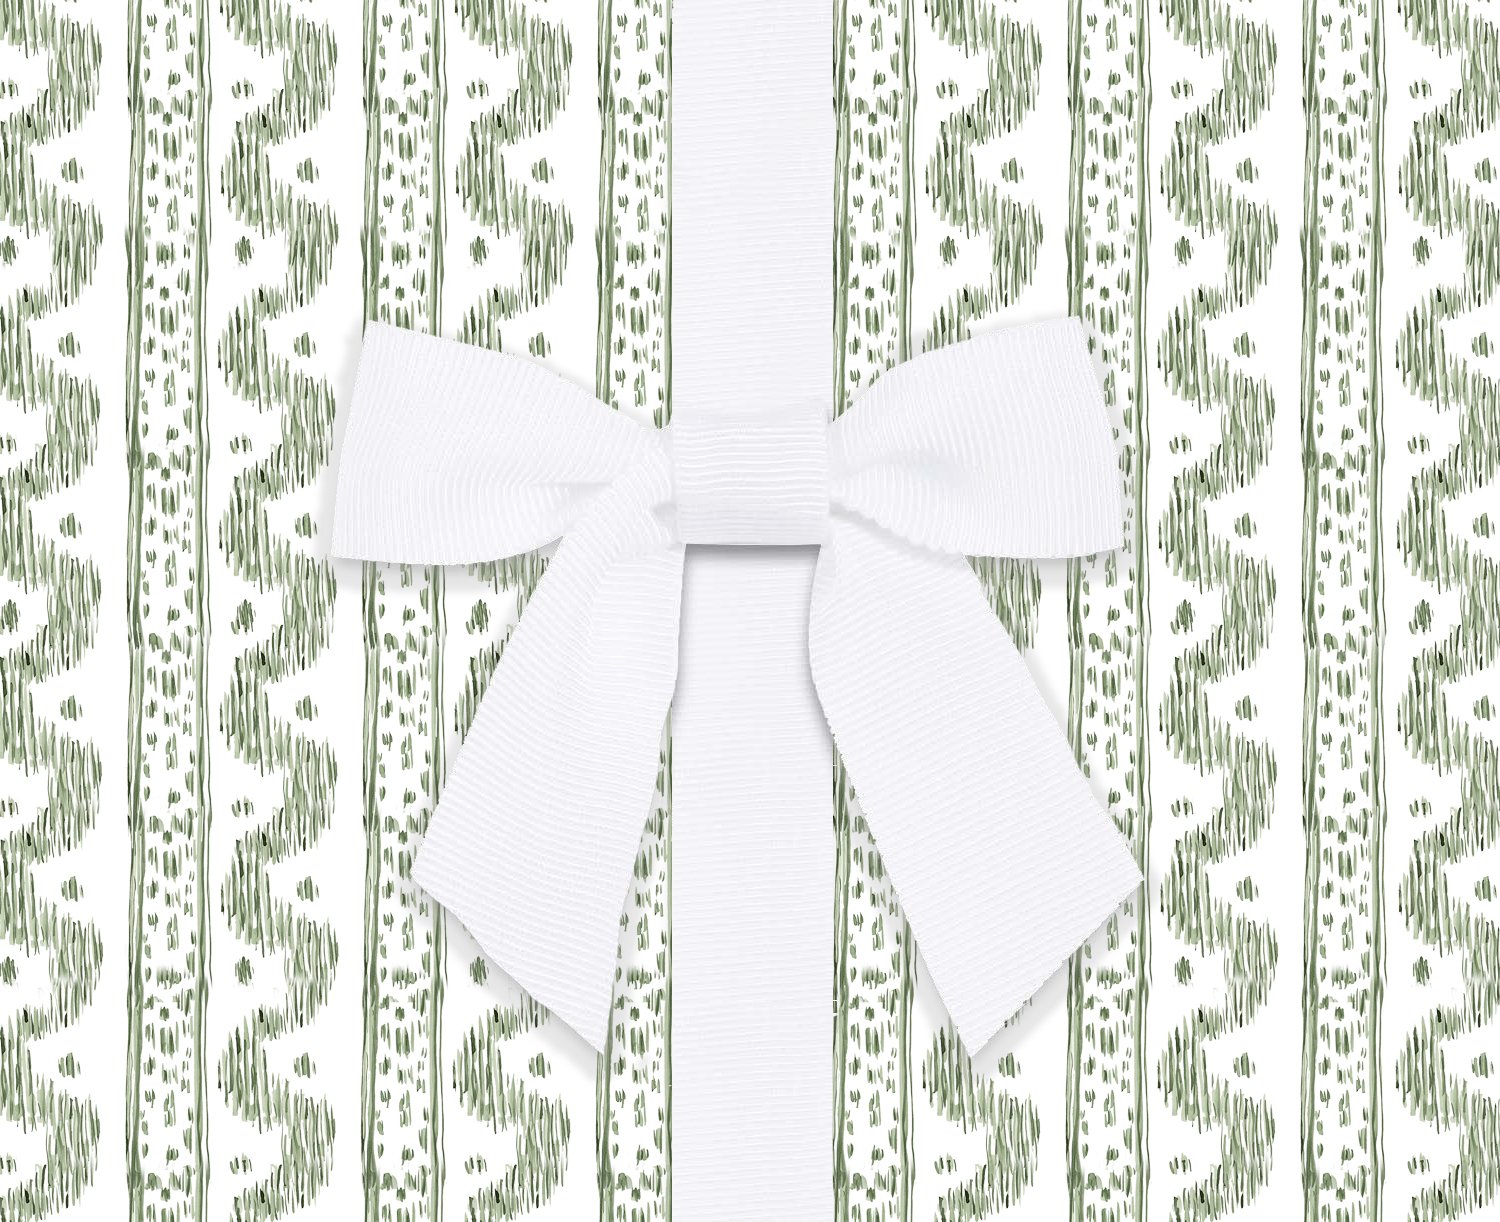 Wrapping Paper & Gift Tags — Catherine Sullivan Design